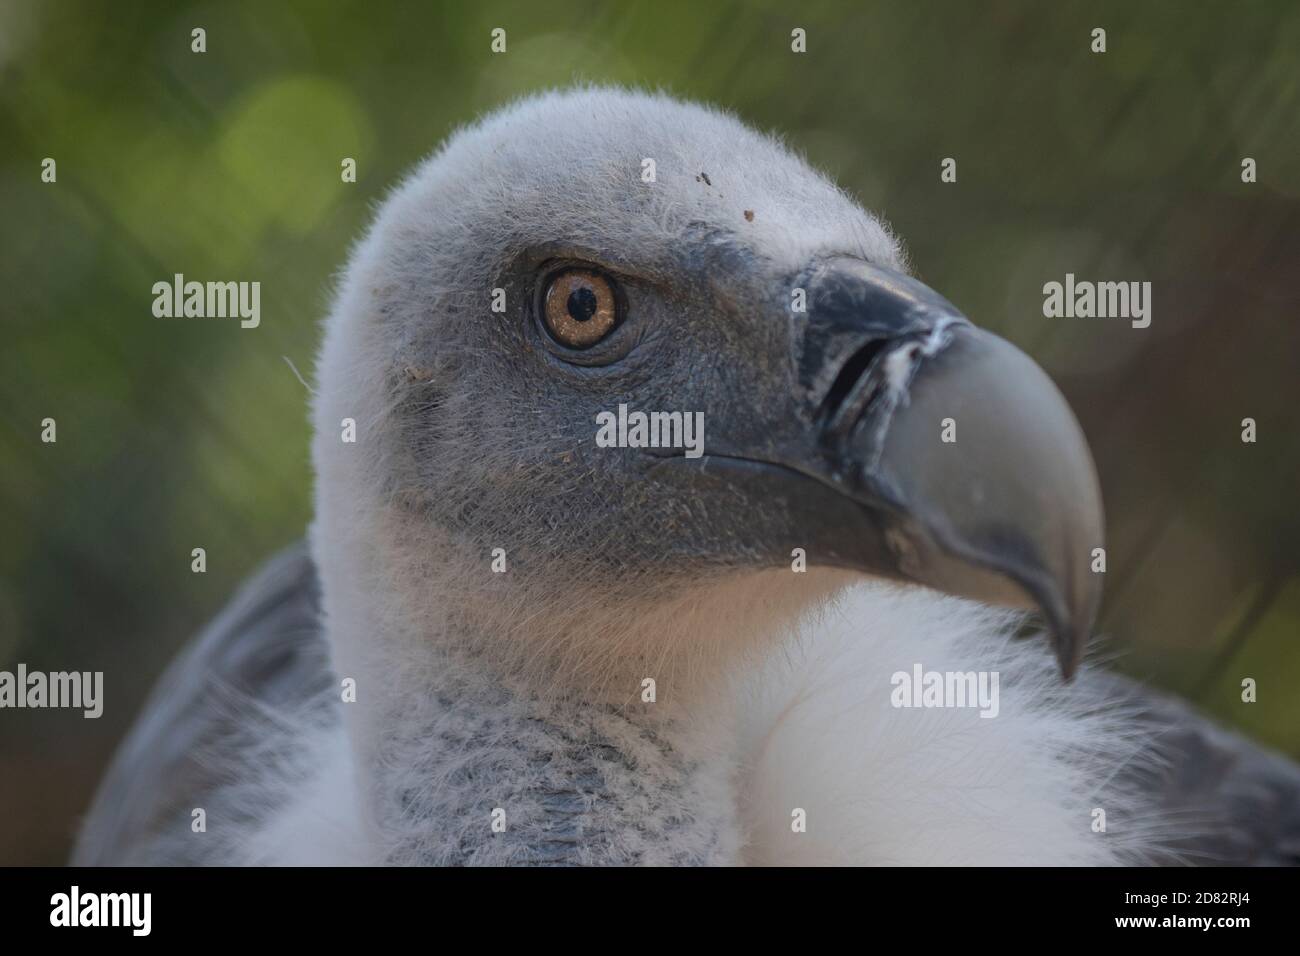 Scary Griffon vulture face, close up with piercing eyes Stock Photo